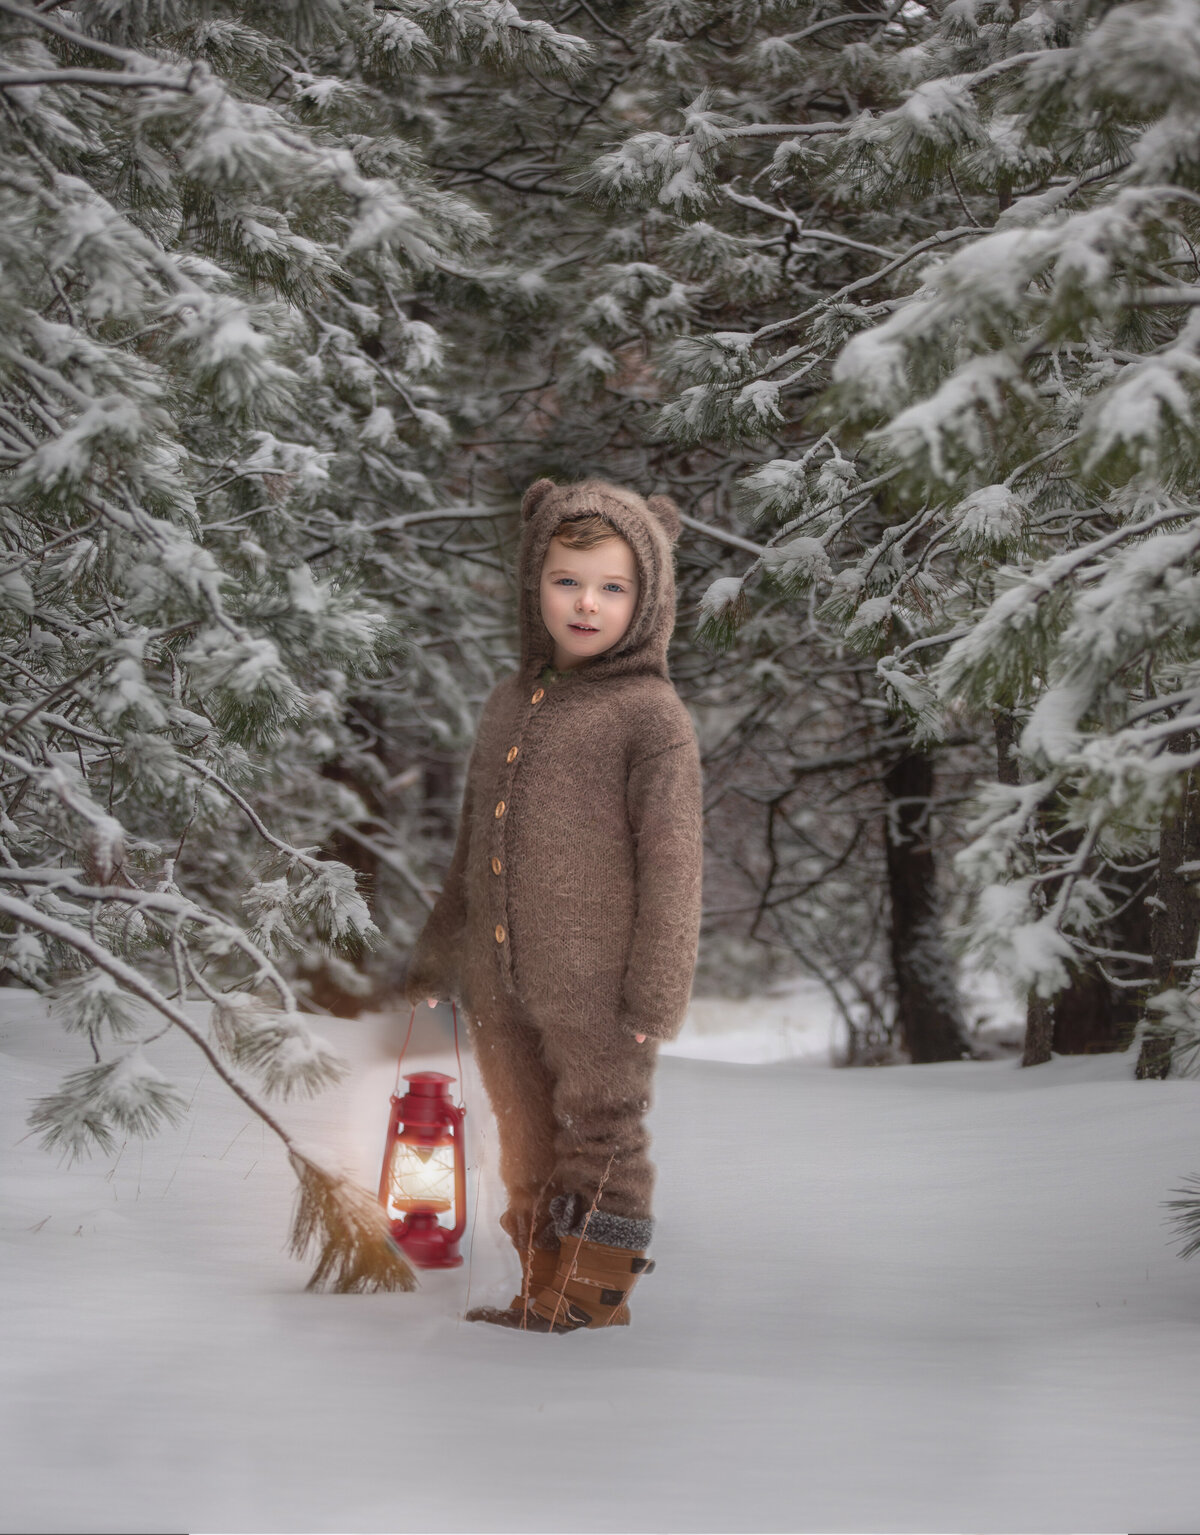 A young boy is outside in a snow covered forest wearing a  brown bear suit holding a red lantern. Photo taken in Ottawa.